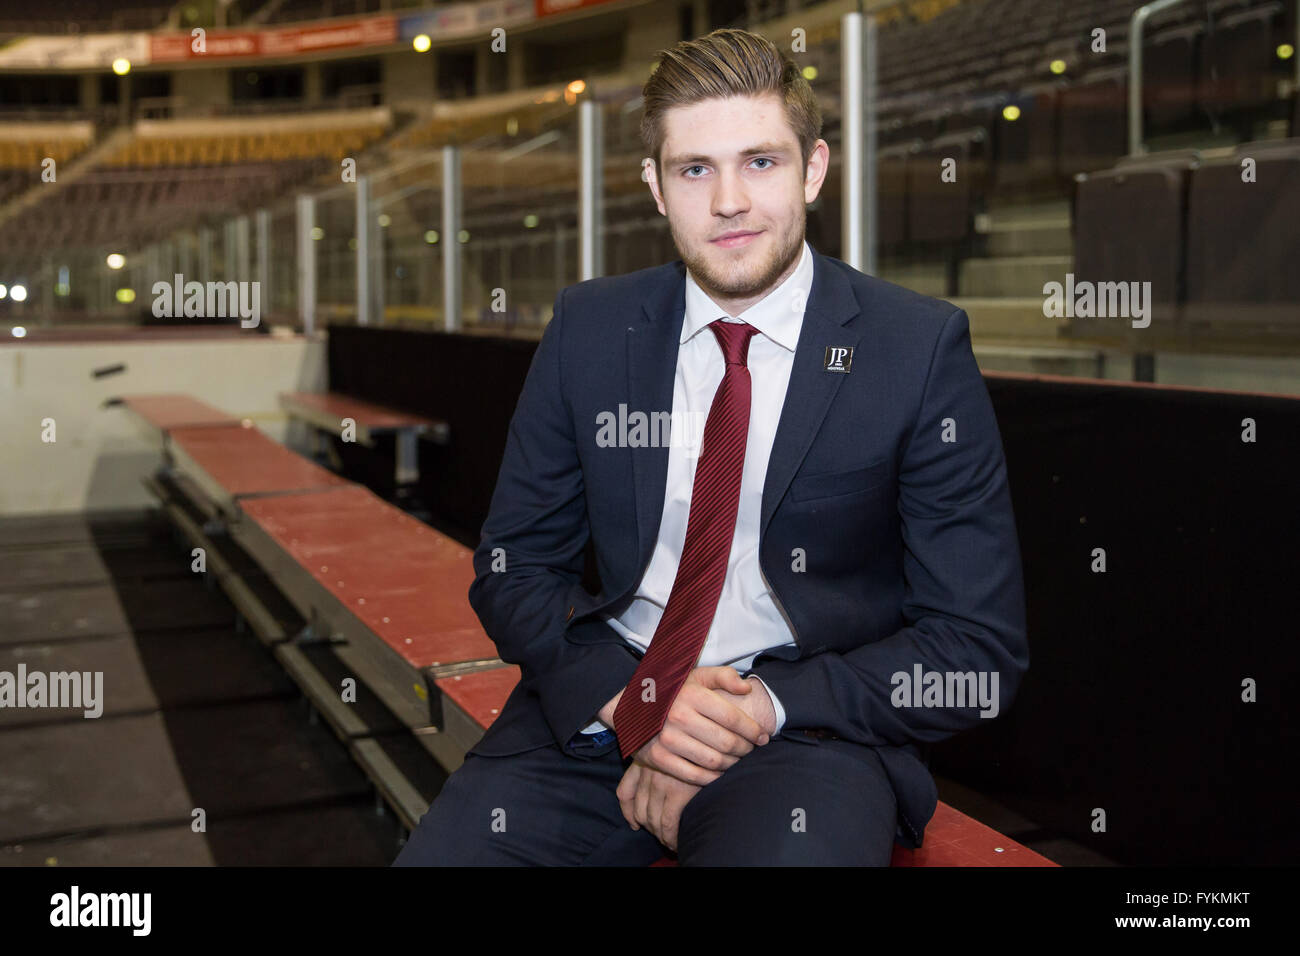 NHL hockey player Leon Draisaitl poses after a press conference